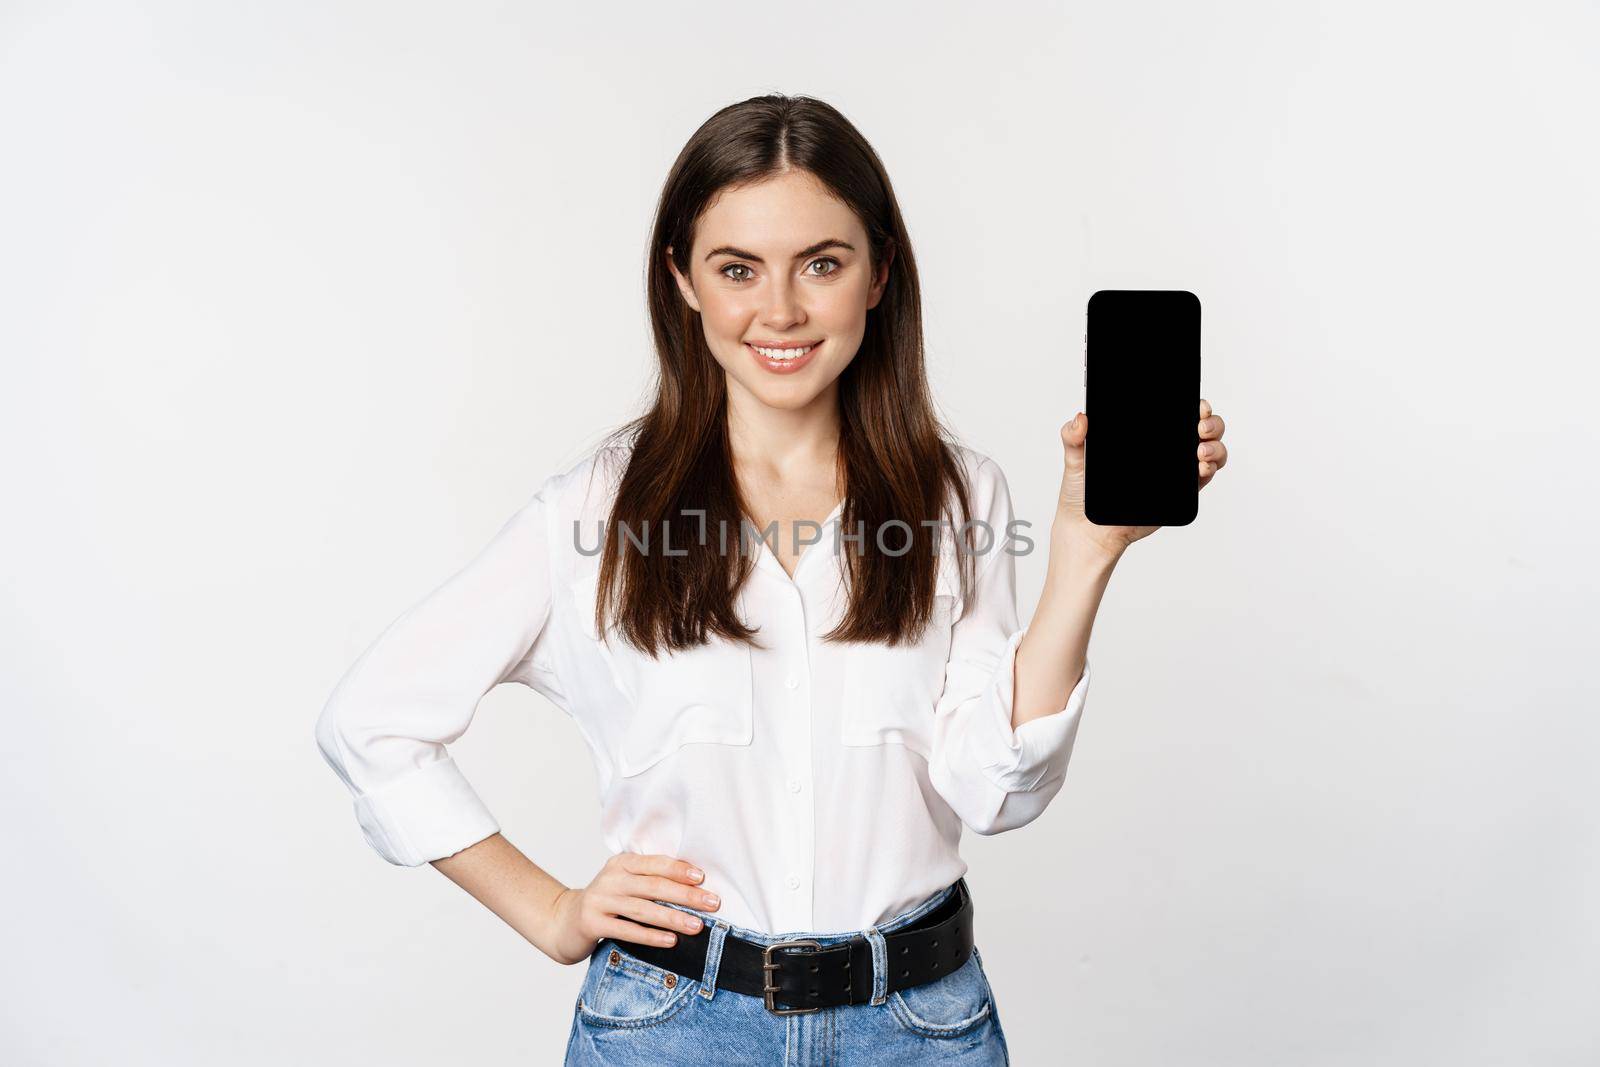 Confident woman in corporate clothes, showing smartphone screen, mobile interface of an application, standing over white background.